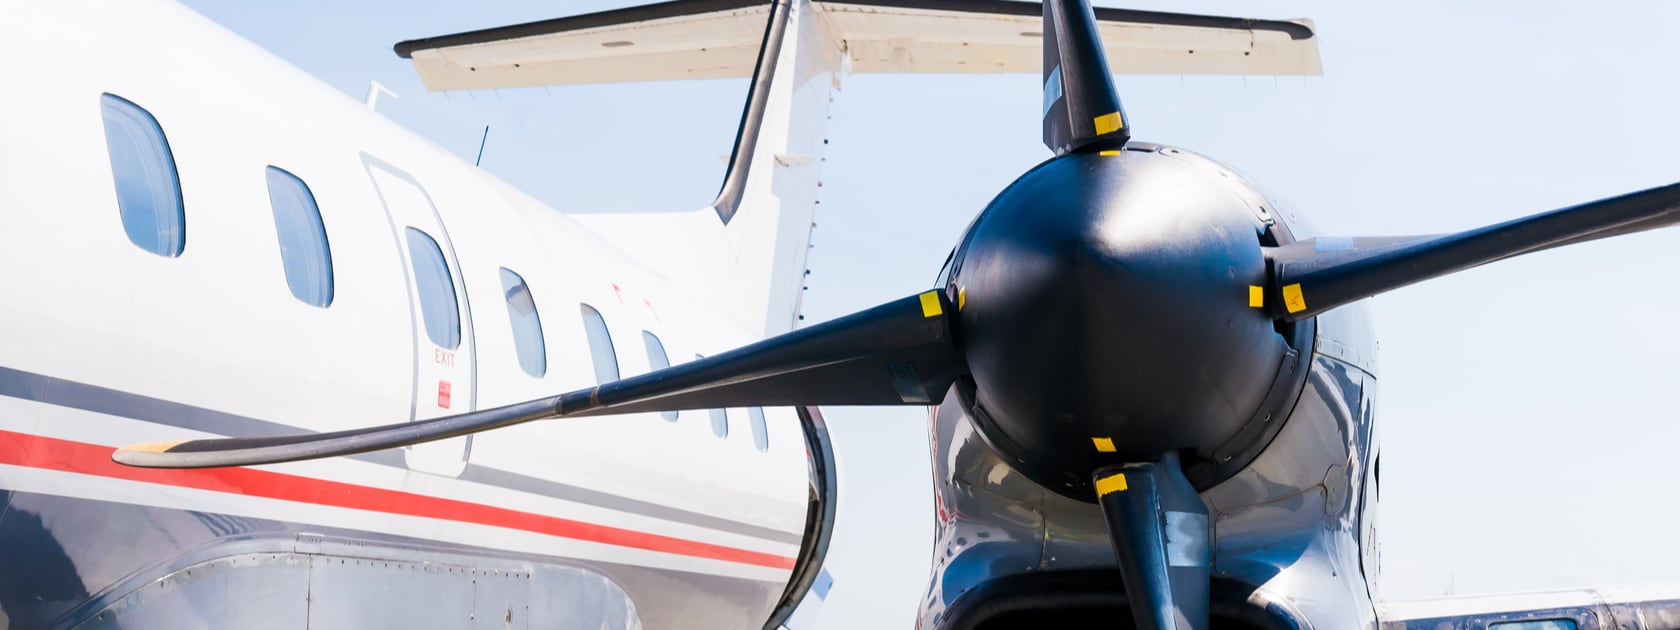  A close up of a private plane propeller and side of the plane.